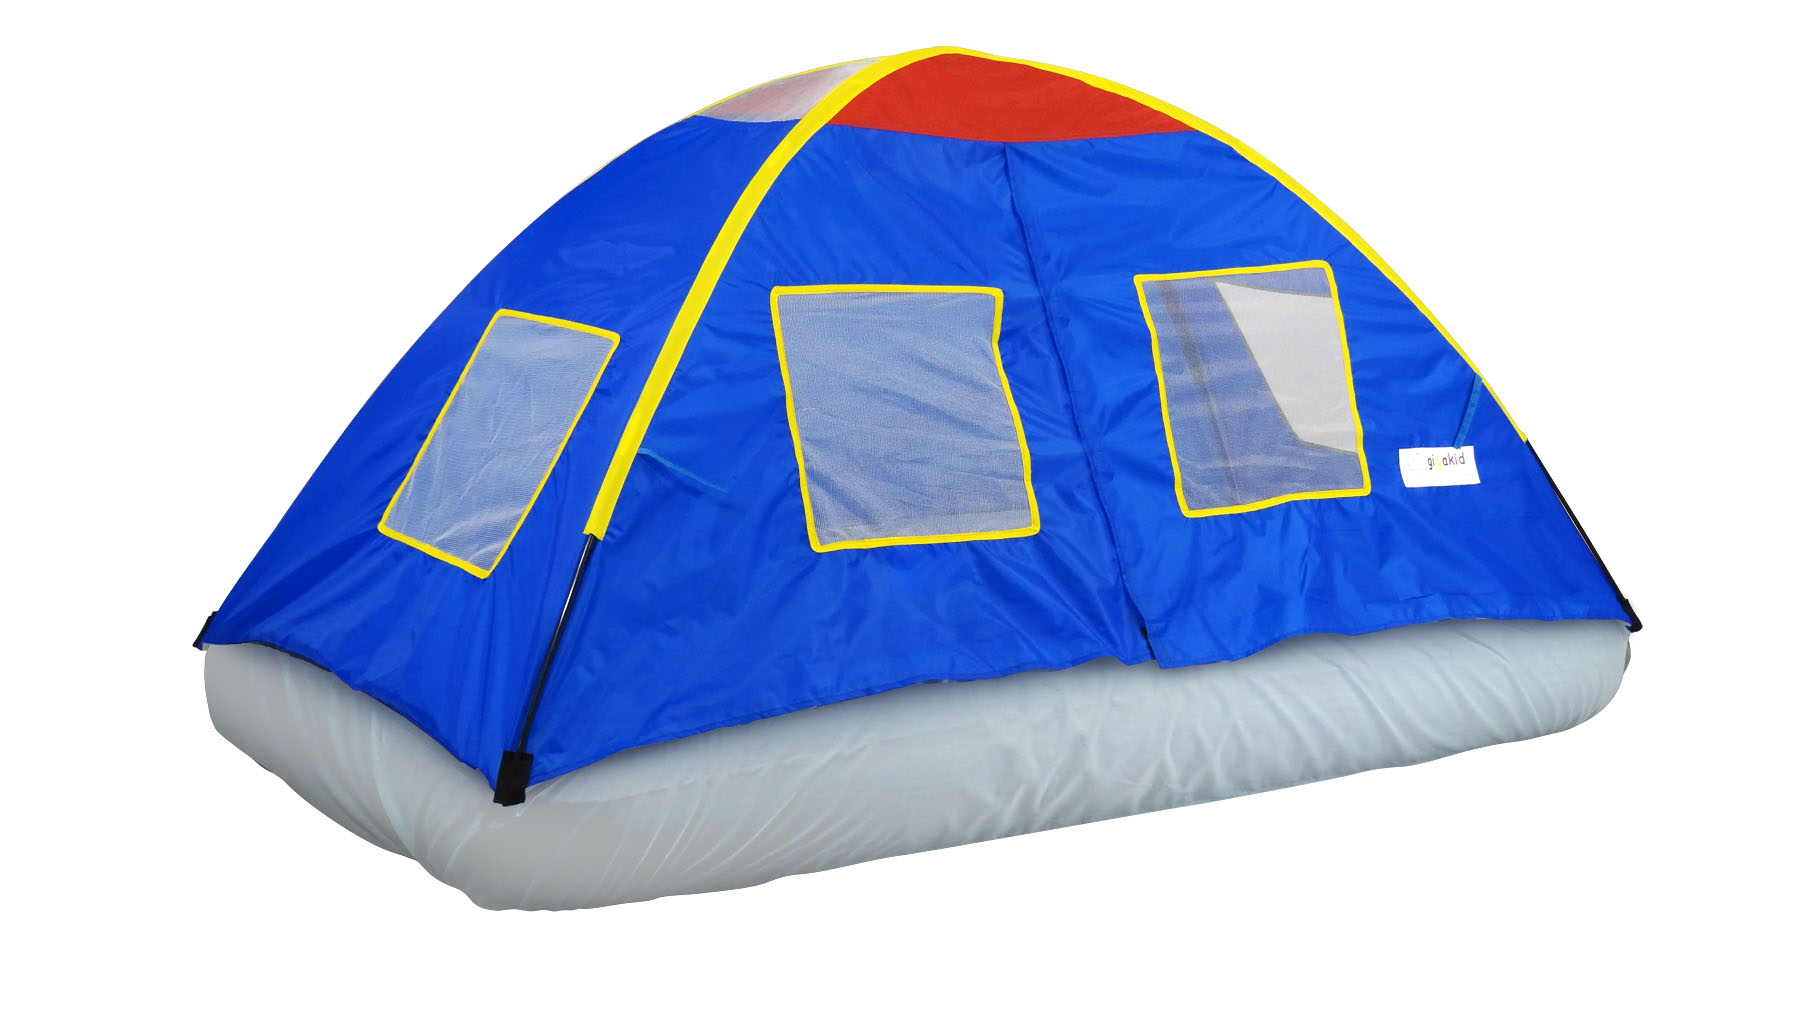 GigaTent 6 Mesh Windows Fiberglass Poles Washable Sheets Polyester Play Tent, Multi-color - image 1 of 2